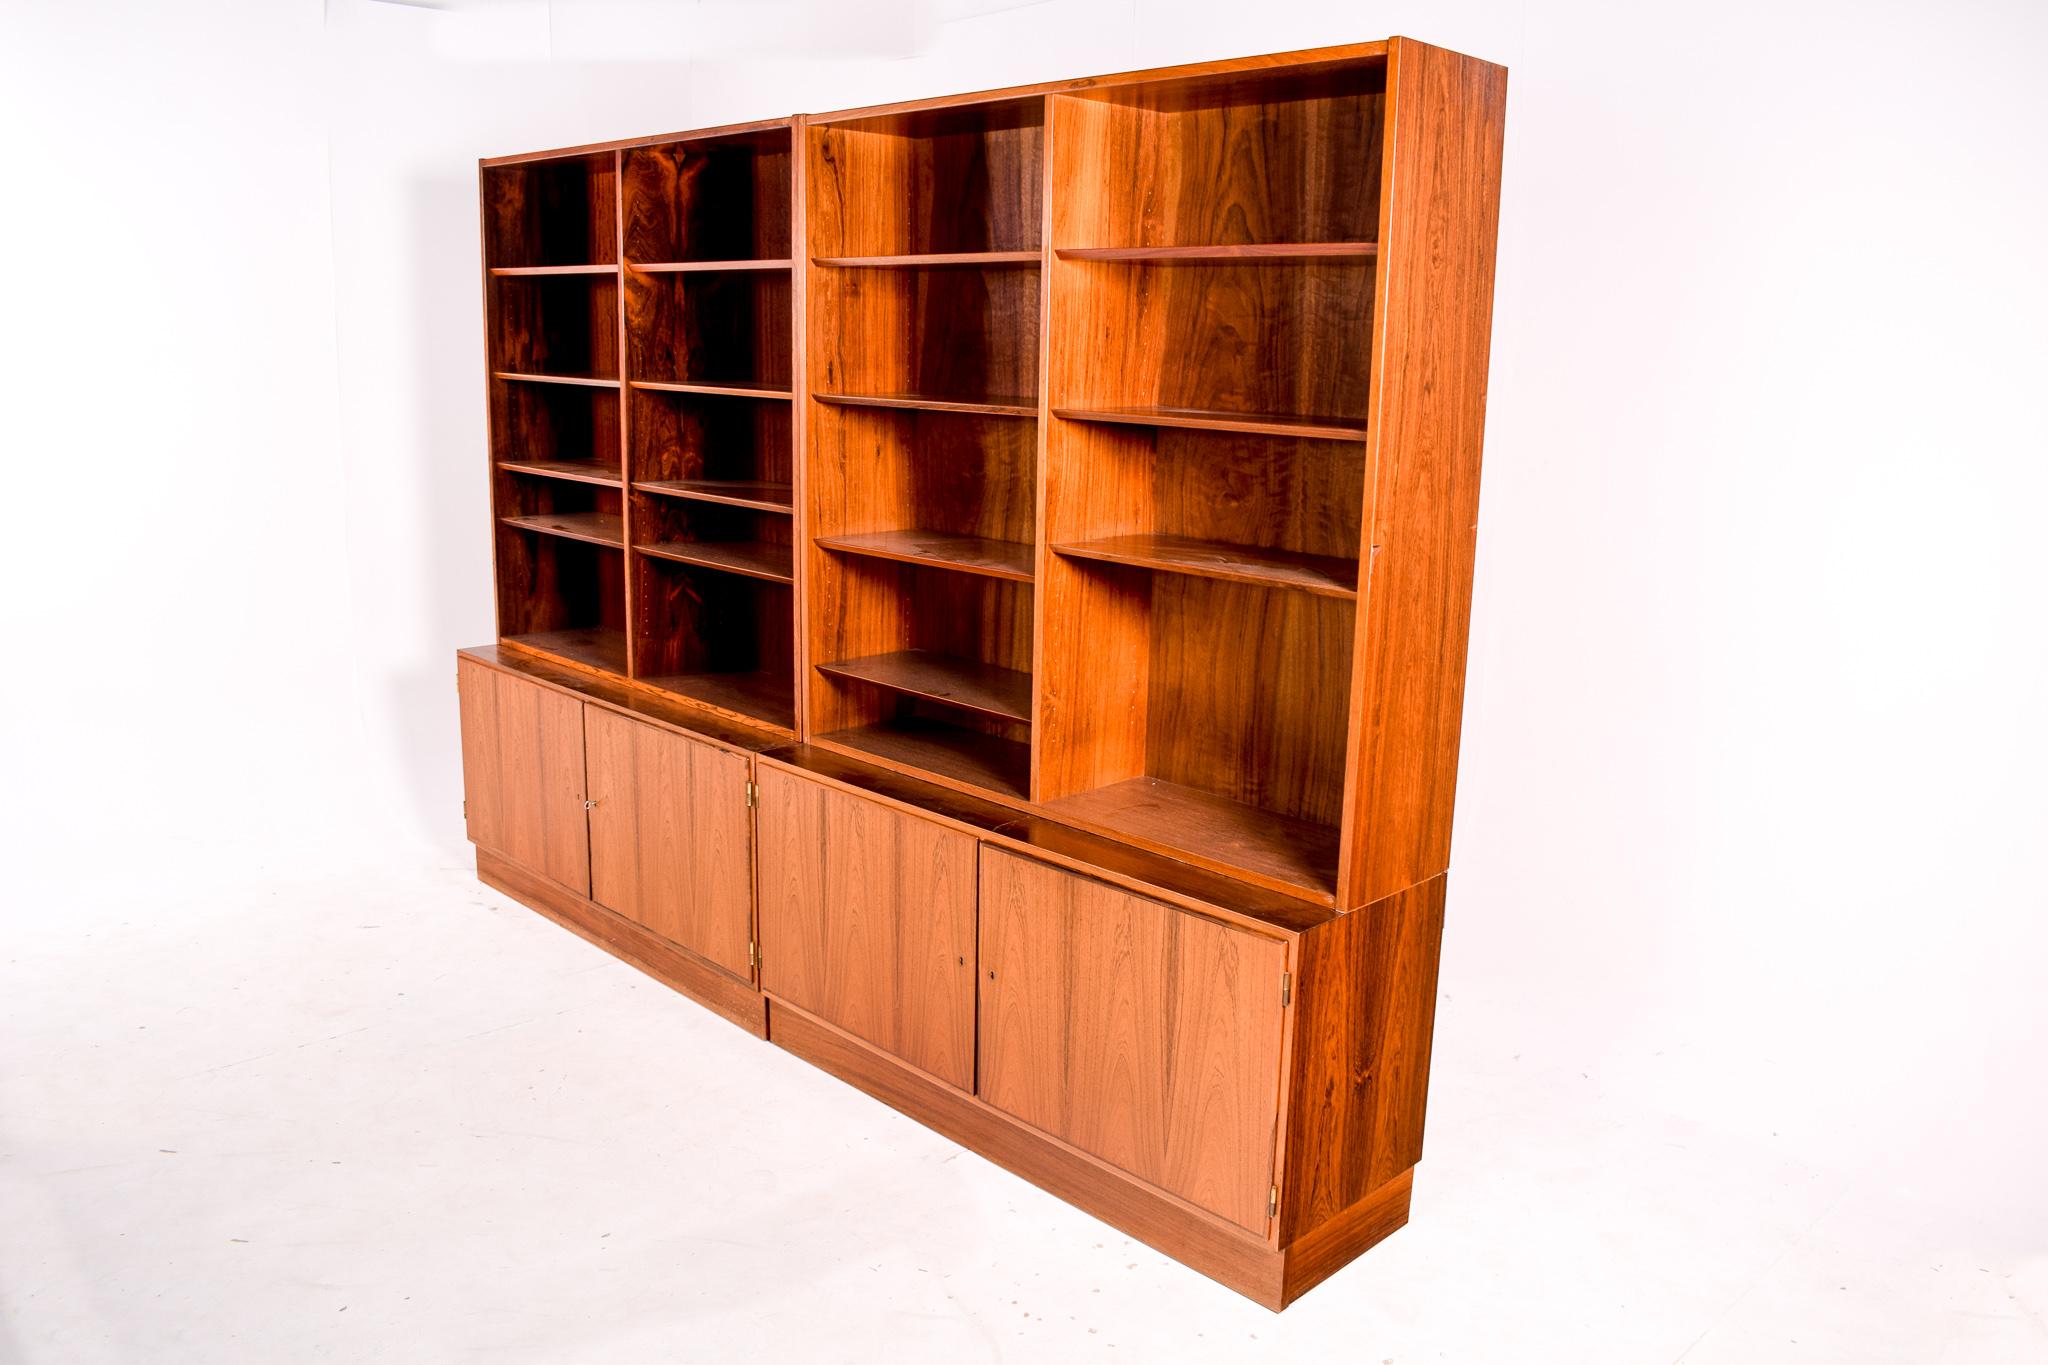 This Danish modern bookshelves unit features original rosewood veneer finish with upper open shelving and closed cabinet space below. A pair of rosewood two-part storage cabinet and bookcase; locking lower cabinet with divided bookcase, each with